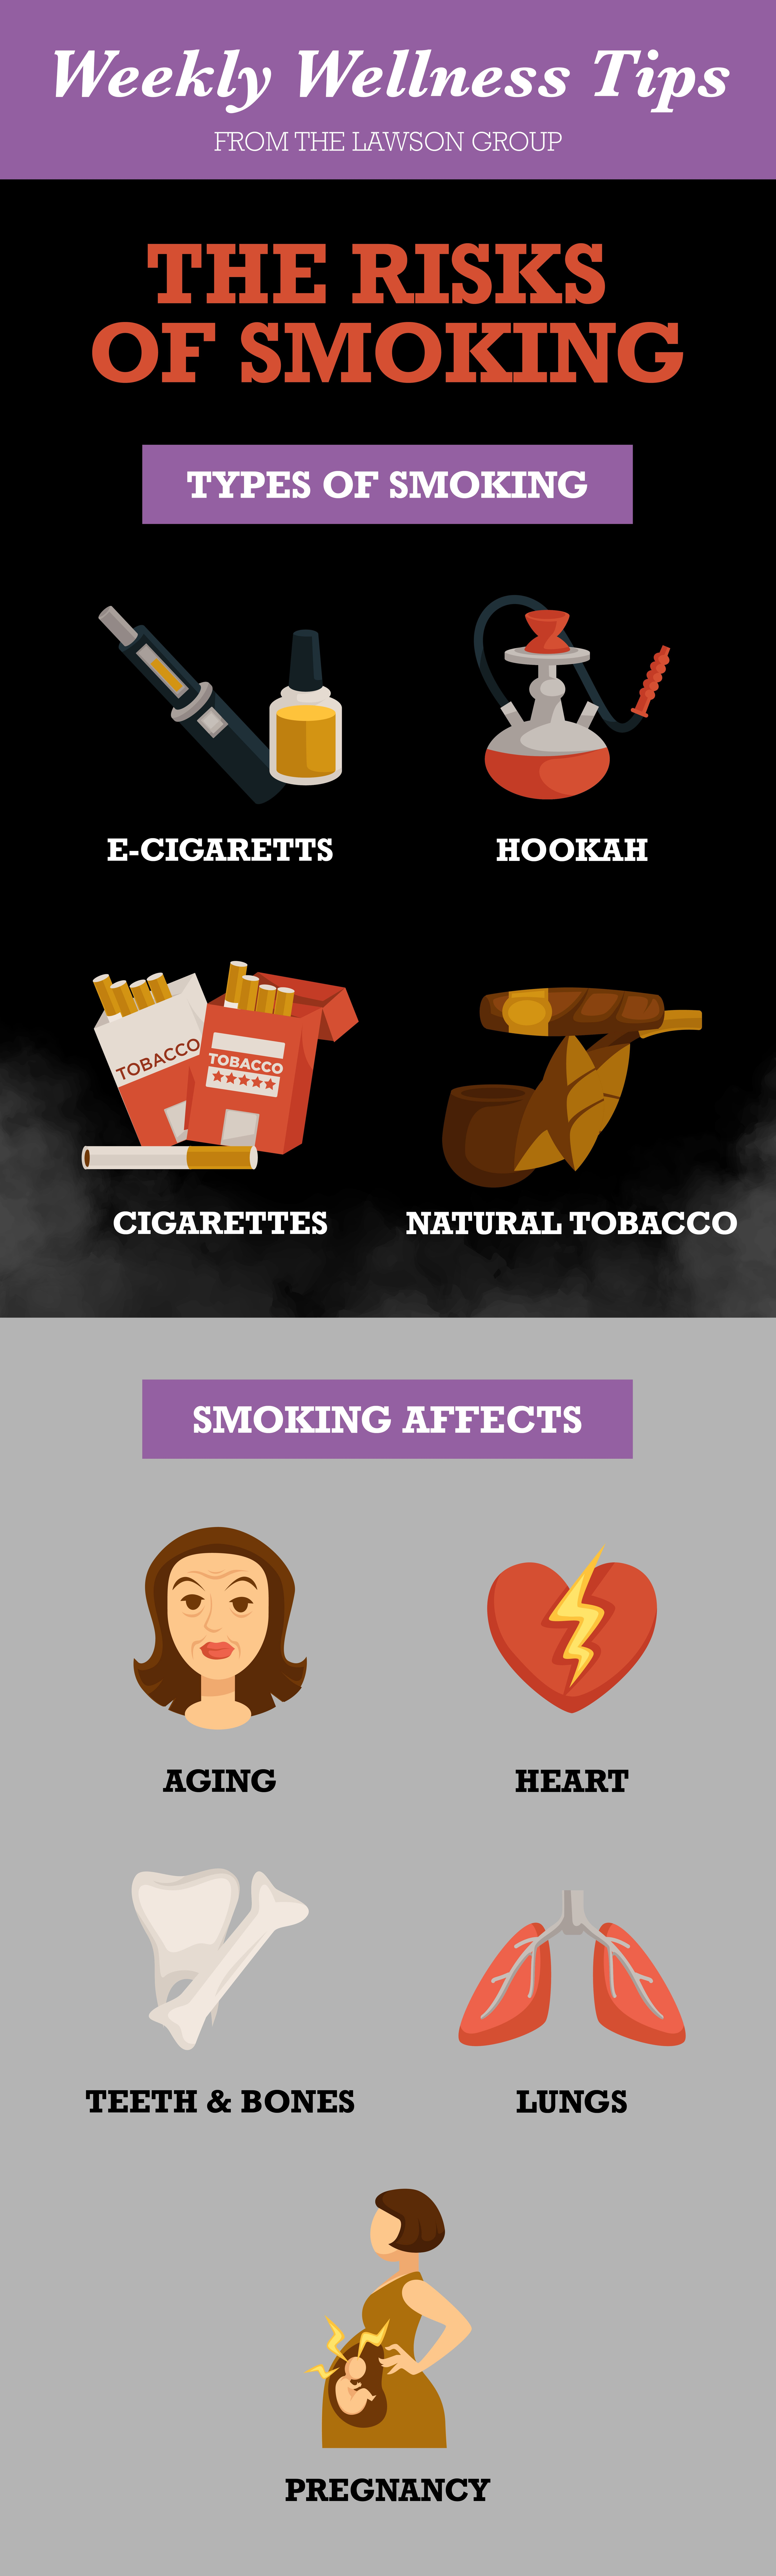 TLG22005 Wellness Tips The Risks of Smoking Infographic-1080px copy-01